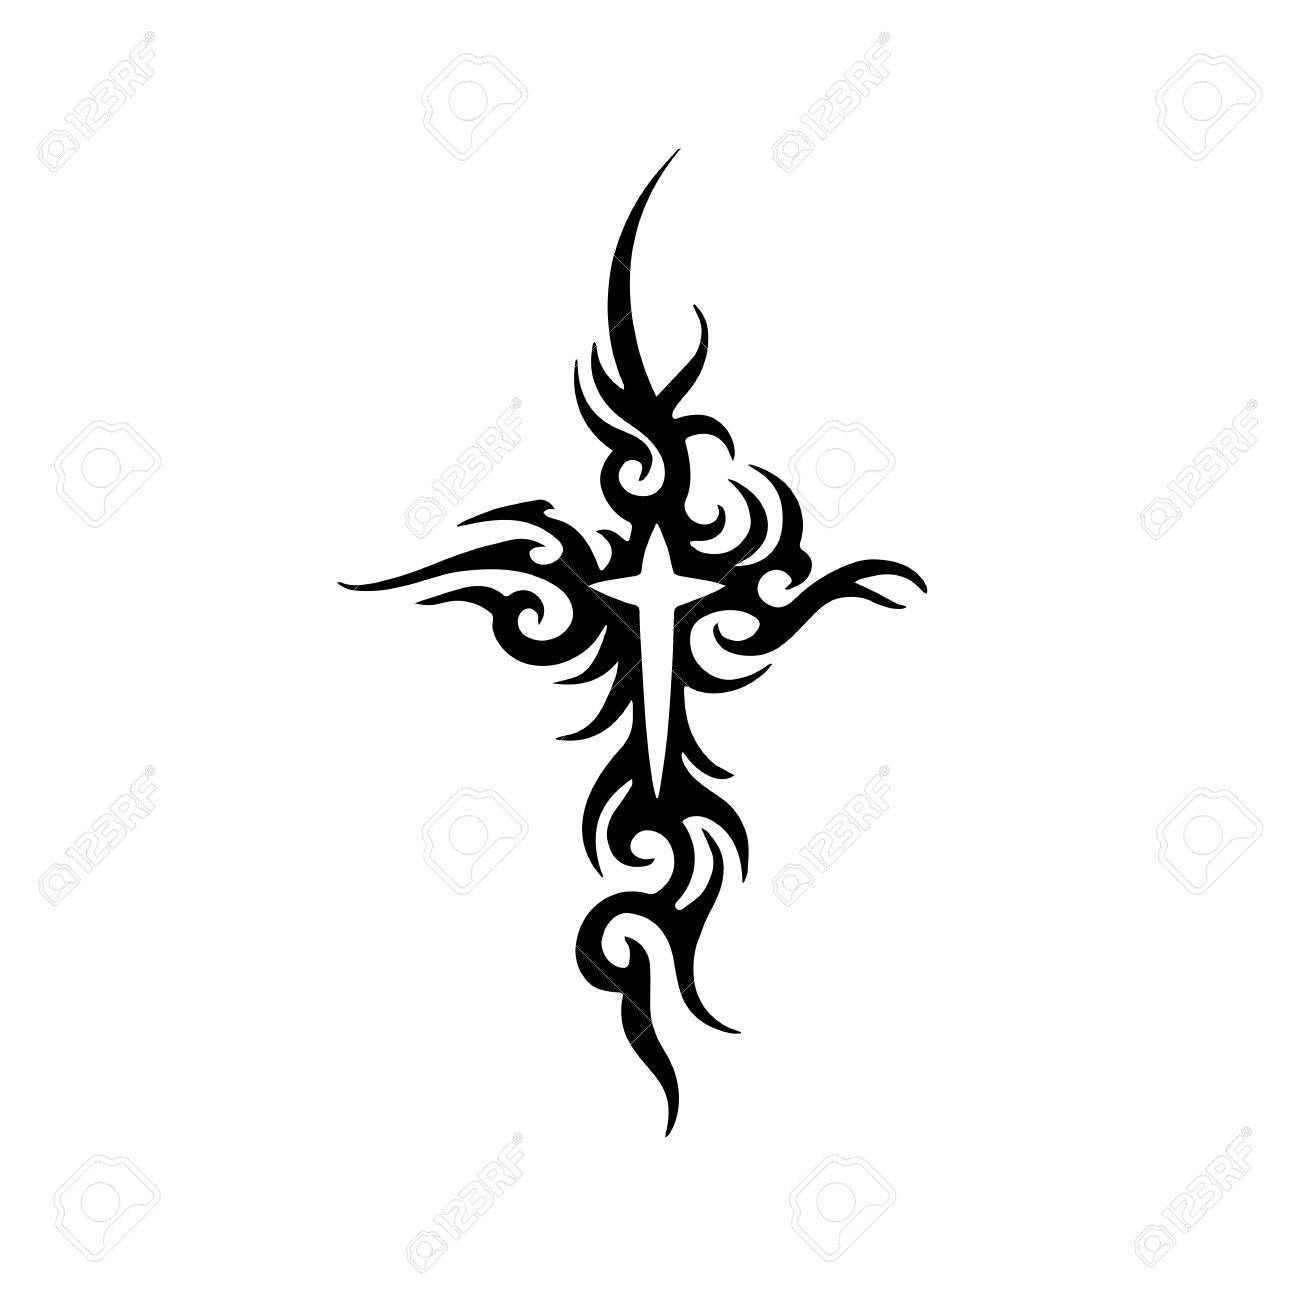 Tribal Cross Tattoo Design Royalty Free Cliparts Vectors And Stock in measurements 1300 X 1300